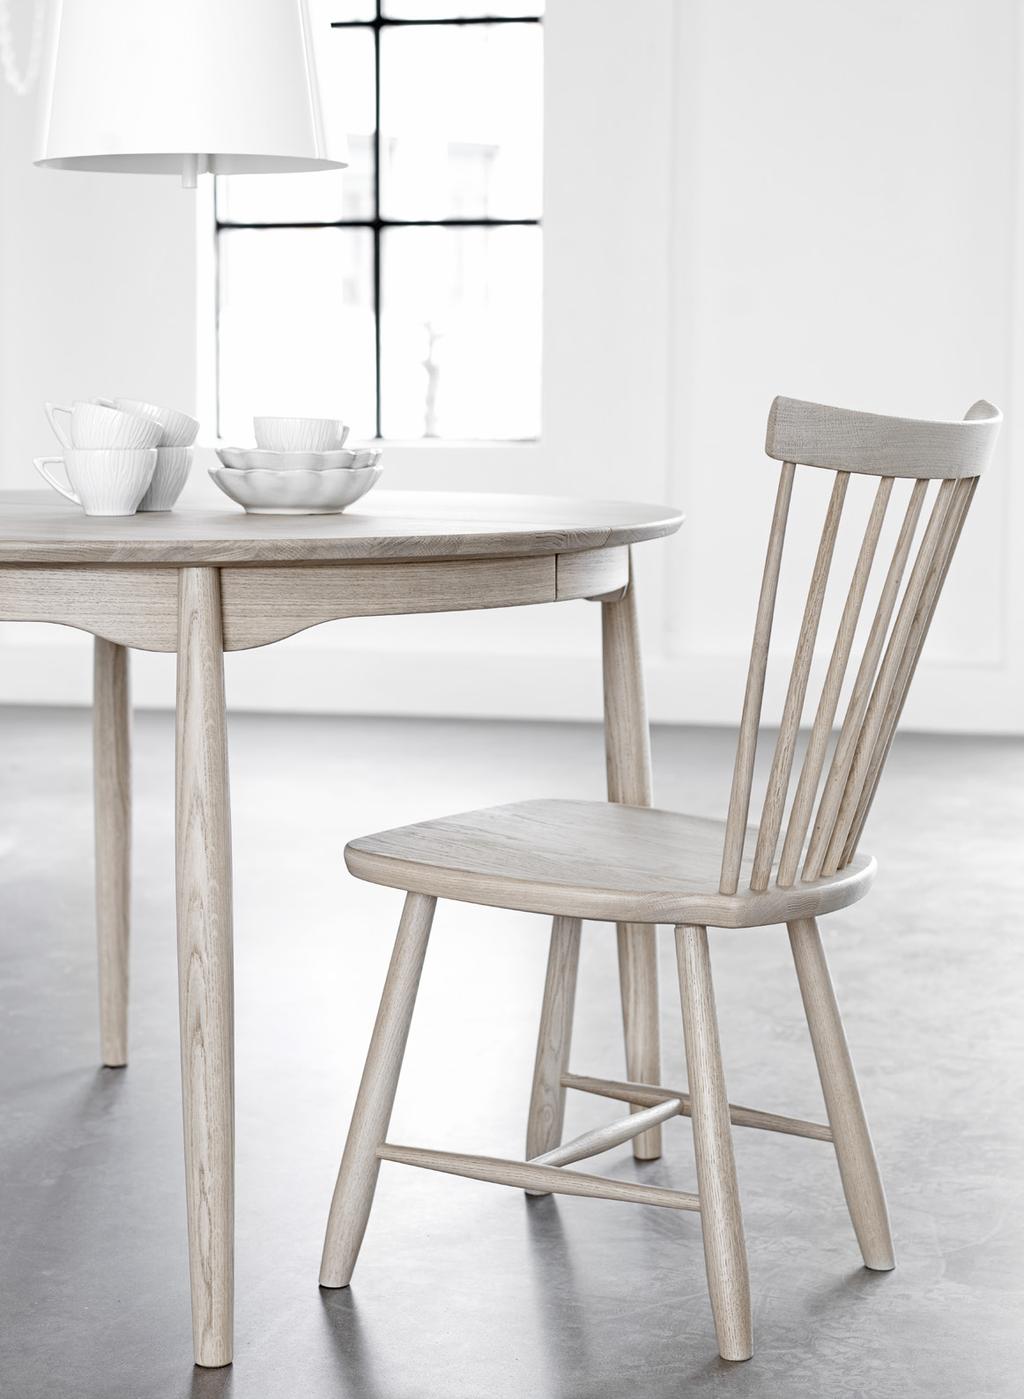 Carl table in oak DESIGN: MARIT STIGSDOTTER The Carl table is designed to pay tribute to Carl Malmsten and his classic